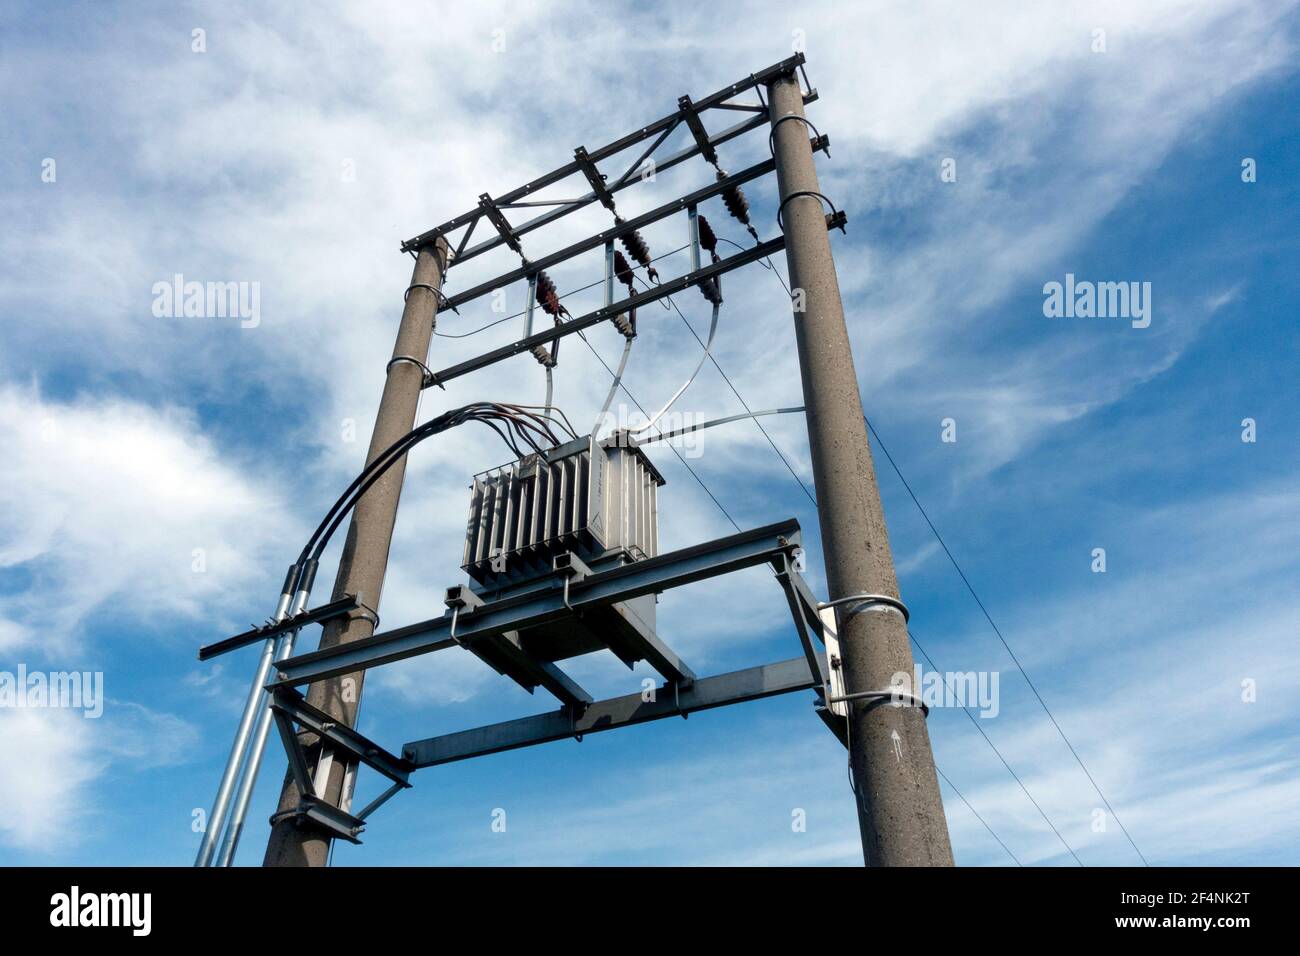 Rural electrical transformer against cloudy sky Stock Photo